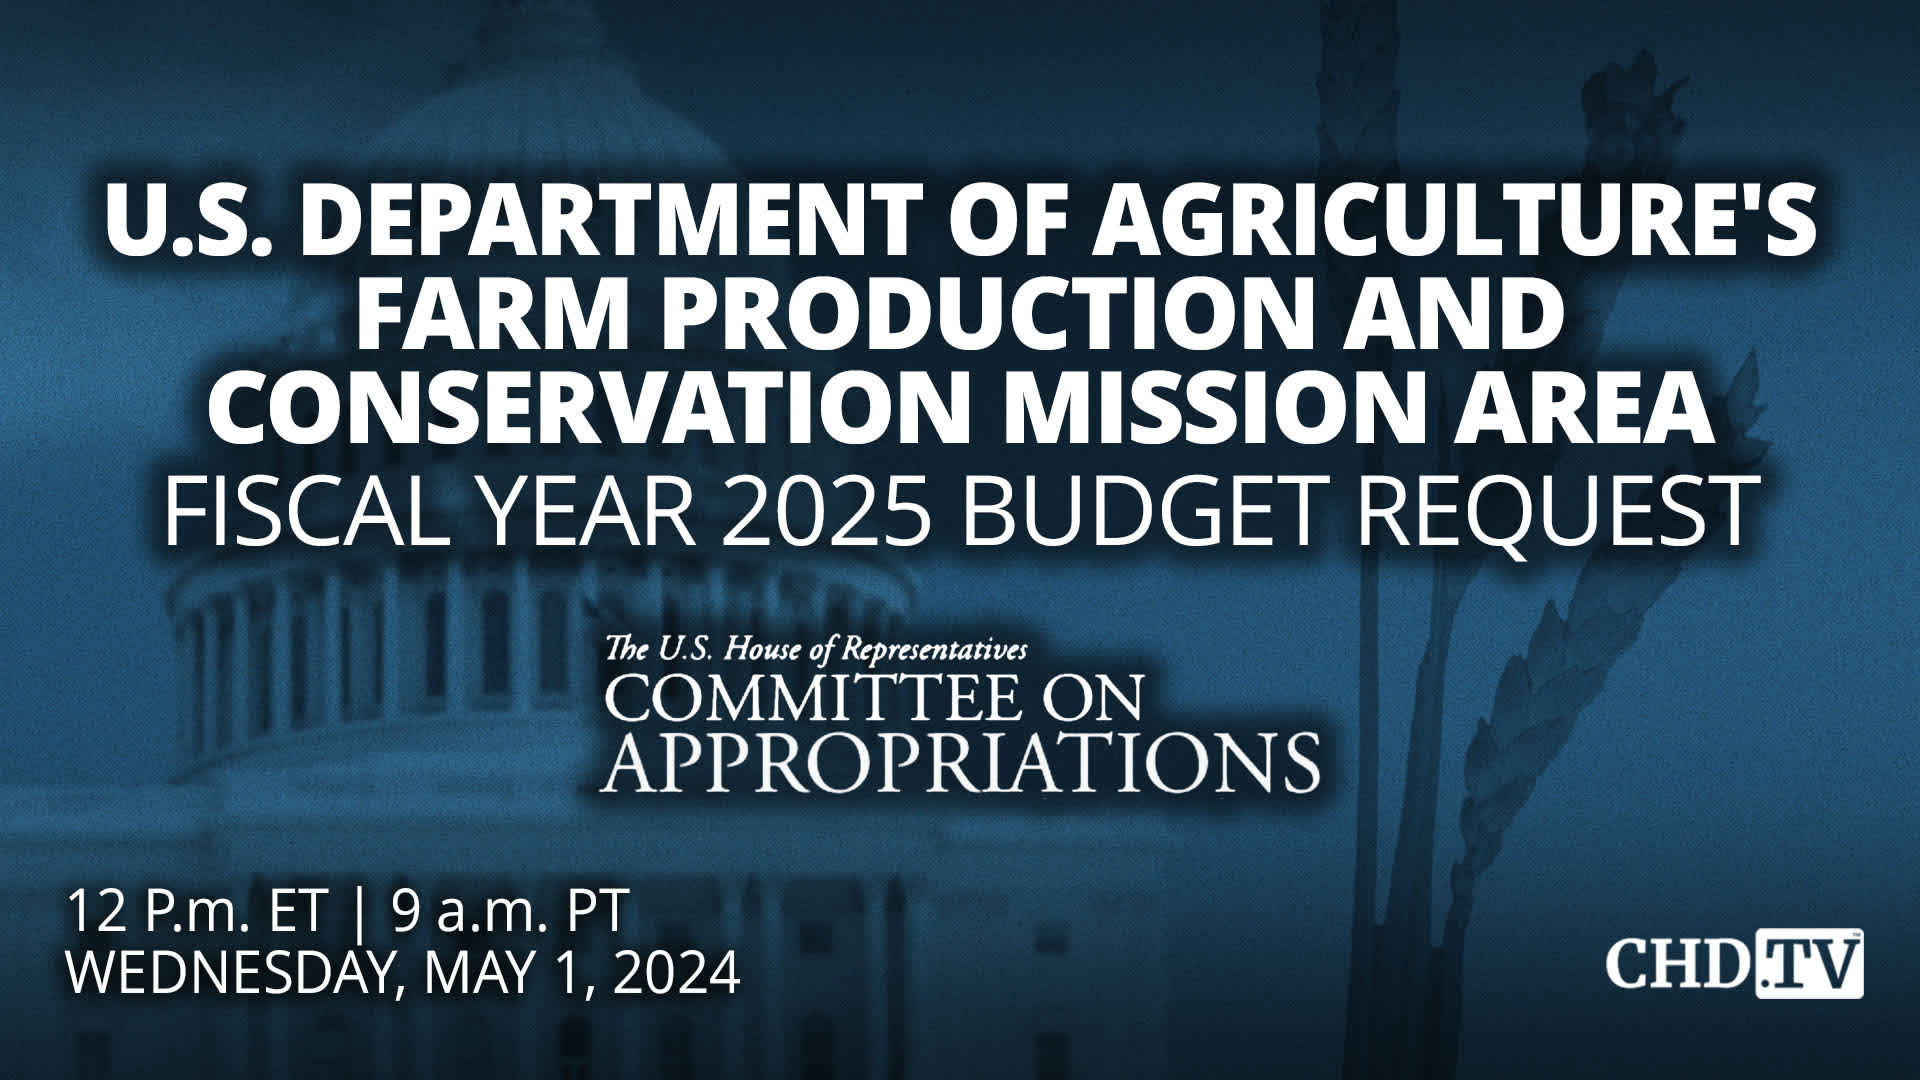 U.S. Department of Agriculture’s FPAC Mission Area Budget Hearing | May 1